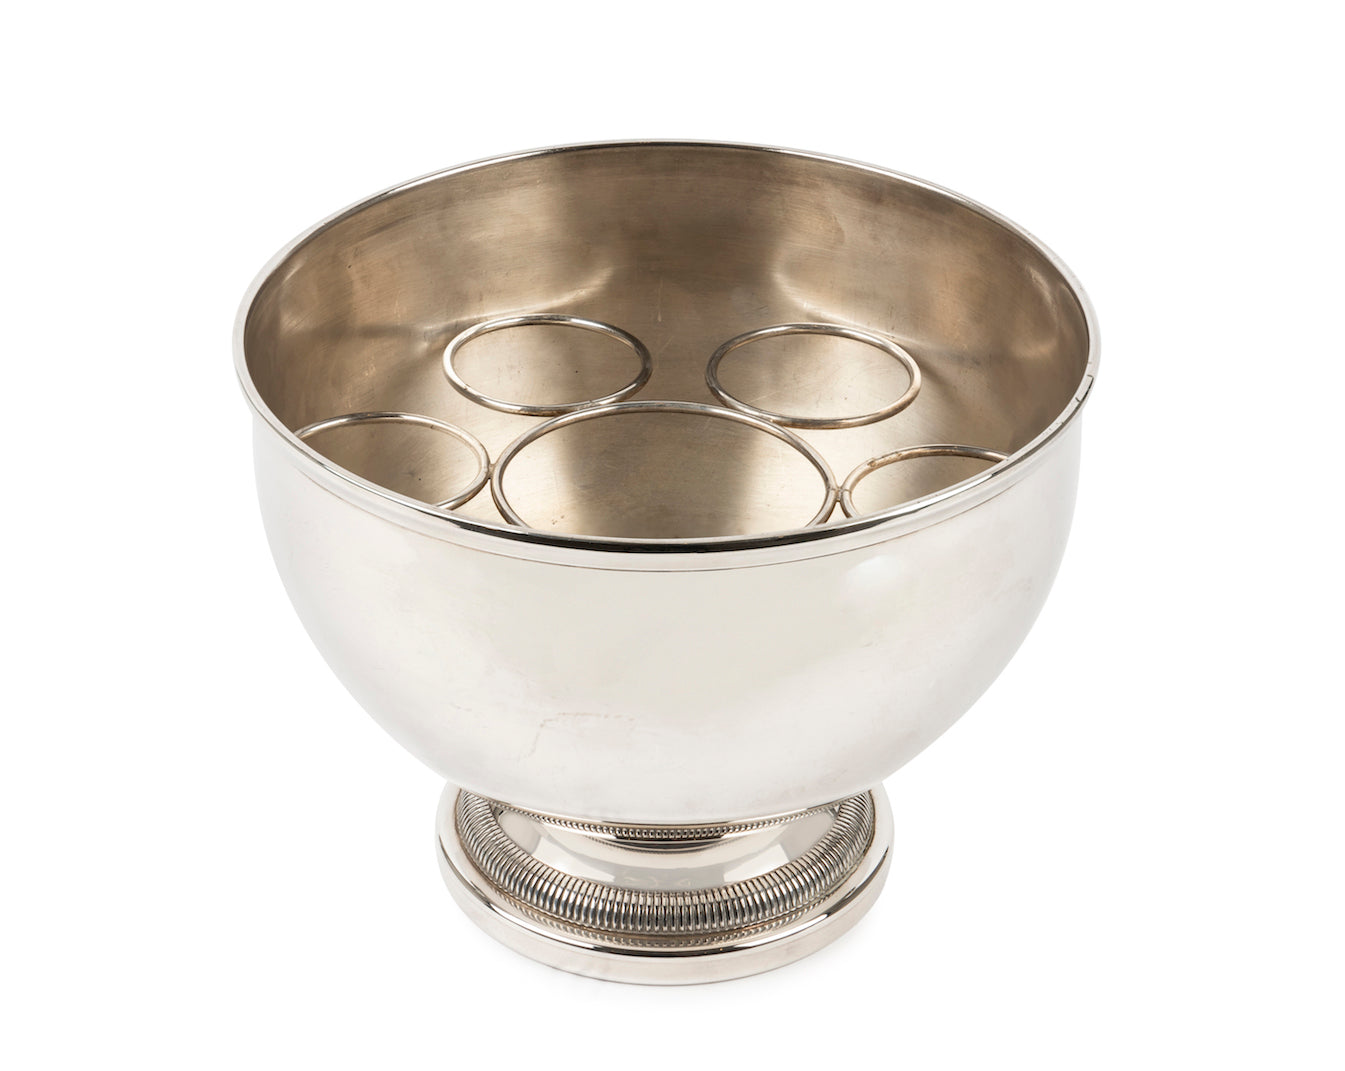 SOLD A silver -plated circular pedestal wine cooler, French Circa 1940